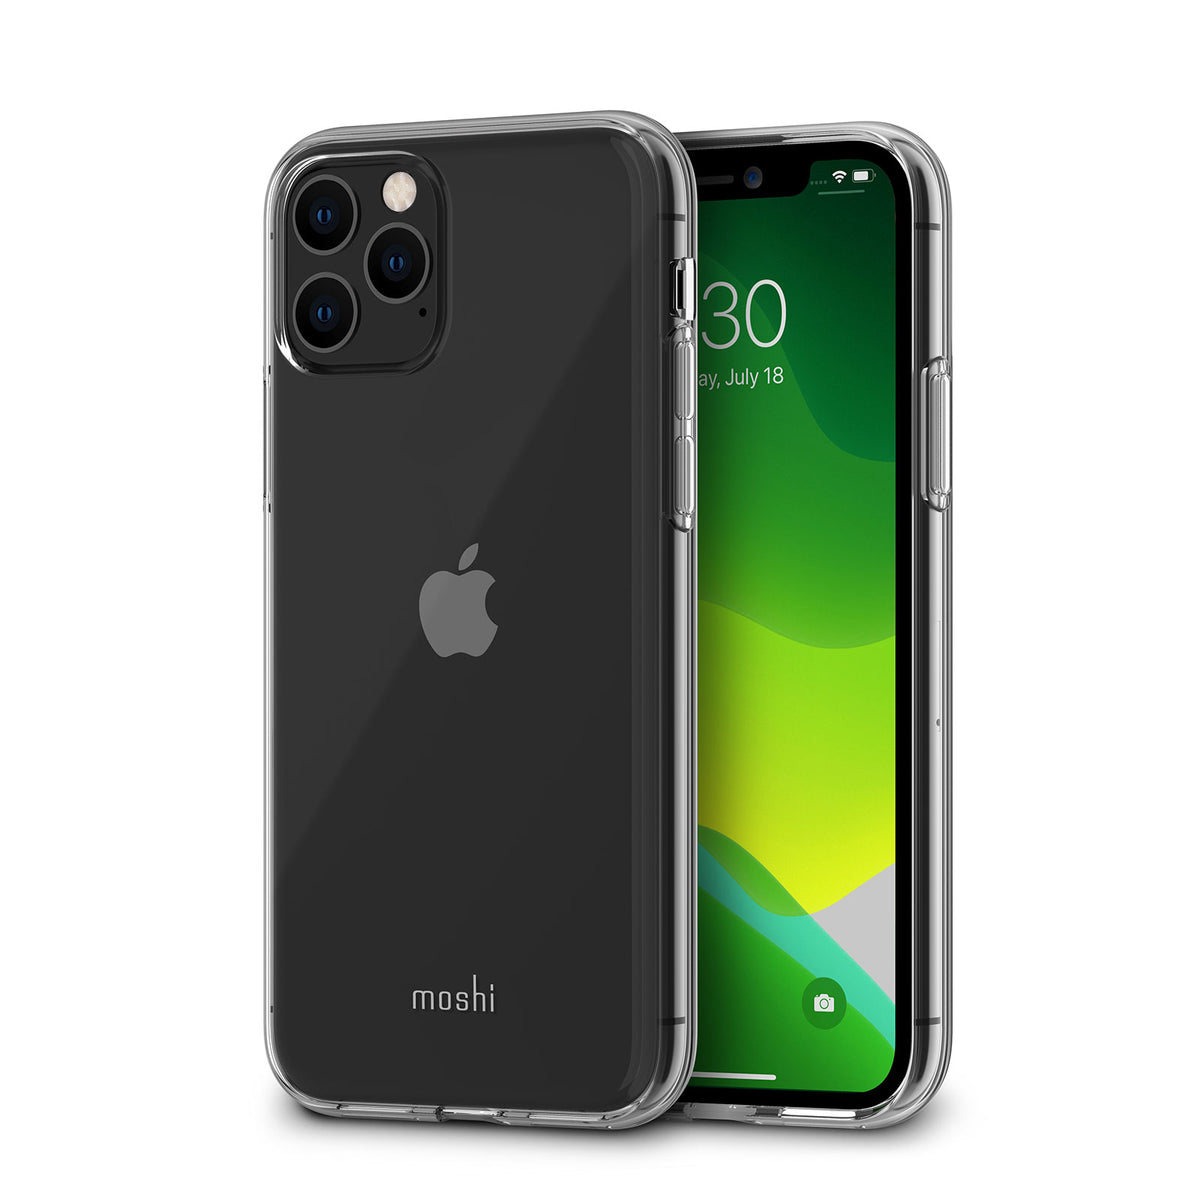 MOSHI Vitros Case for iPhone 11 Pro - Crystal Clear